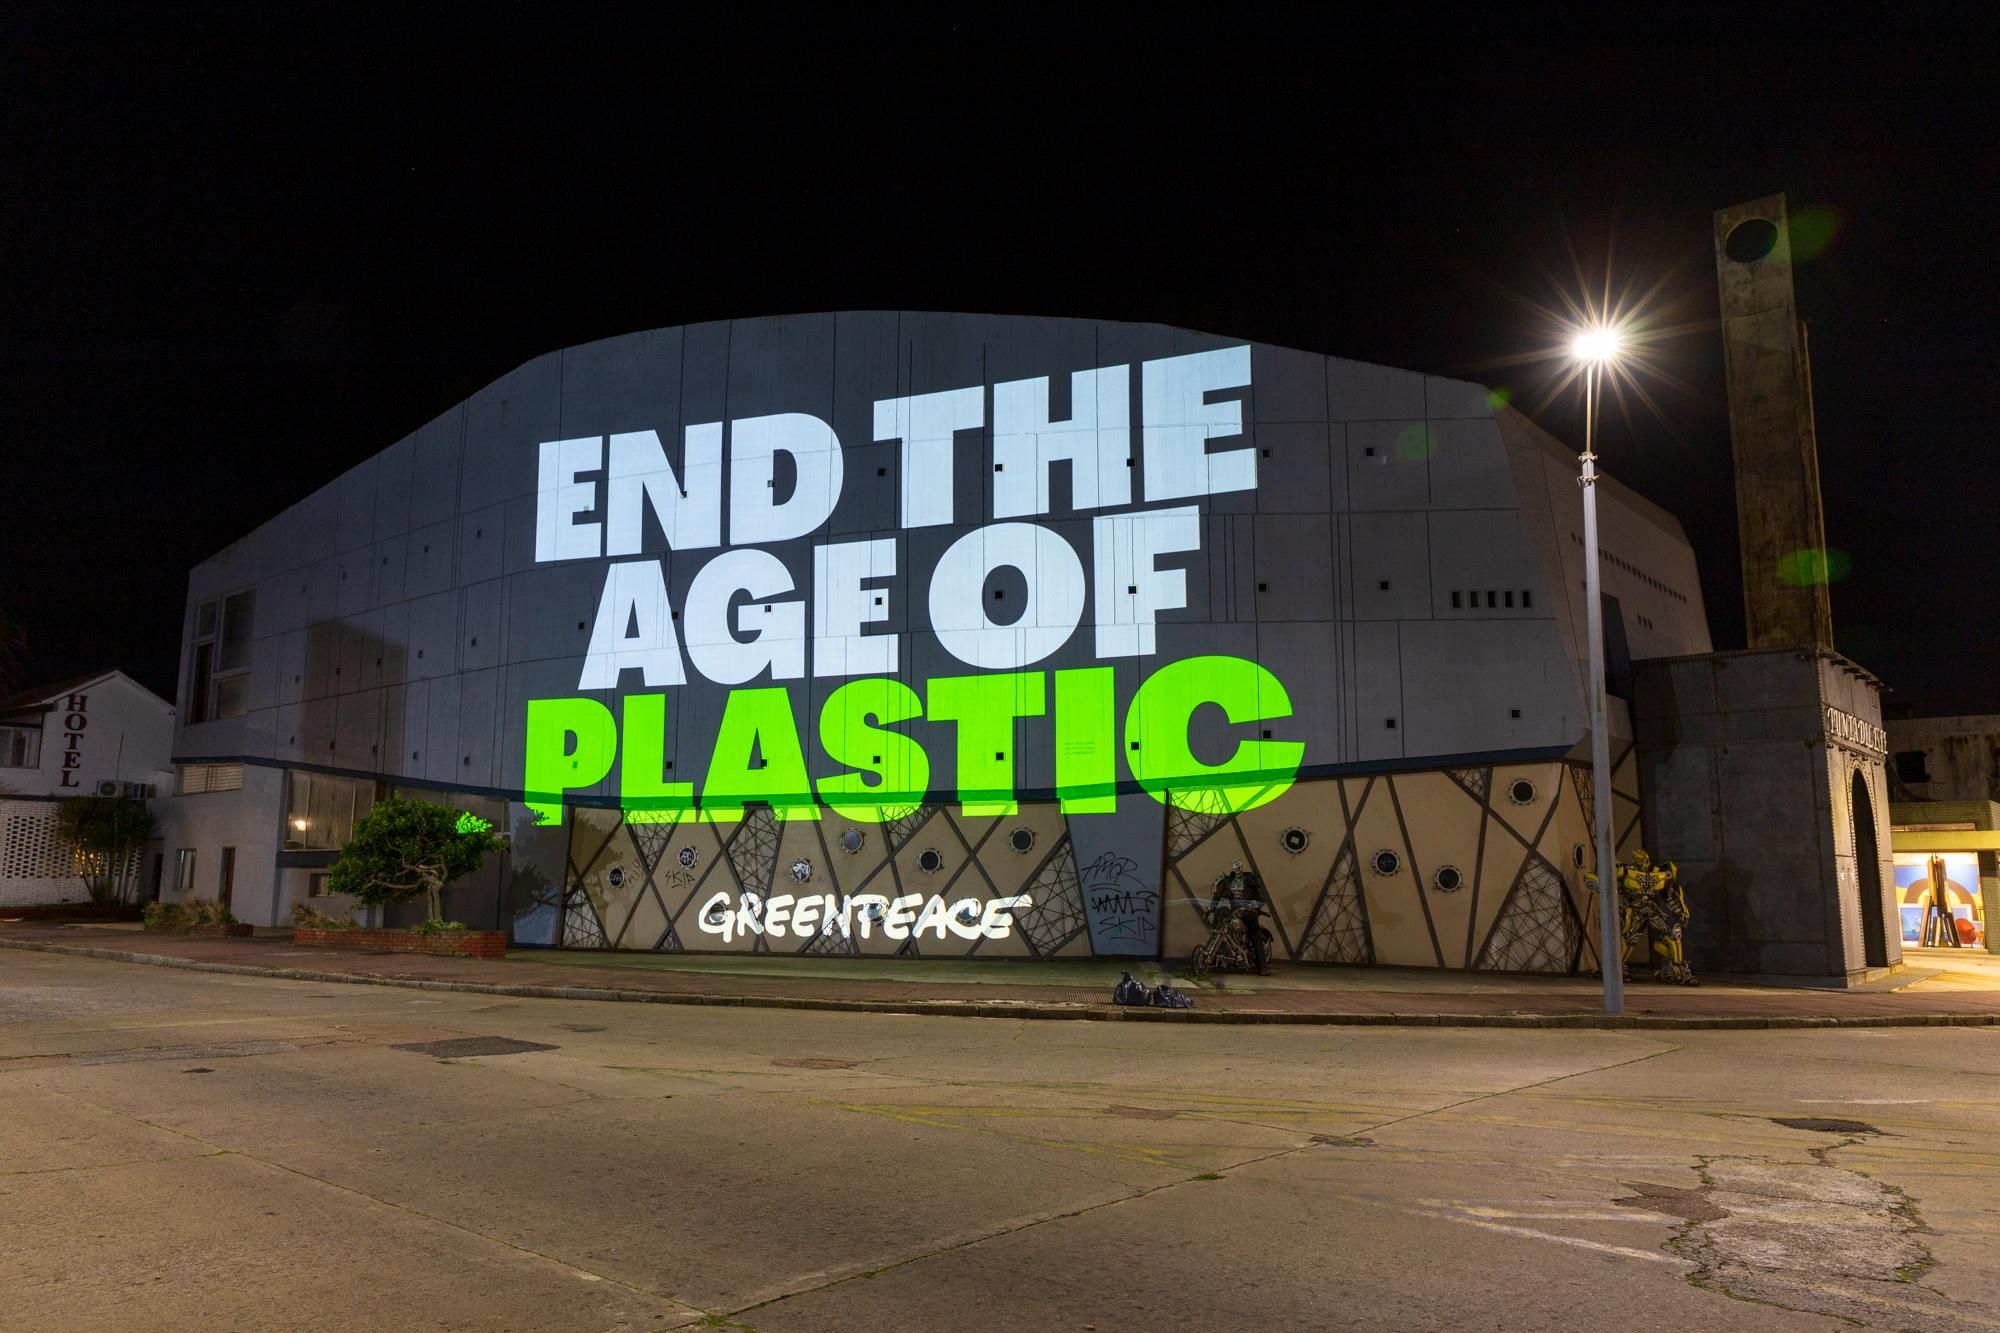 Greenpeace projects messages as world leaders discuss a Global Plastics Treaty in Punta del Este, Uruguay on November 29, 2022.